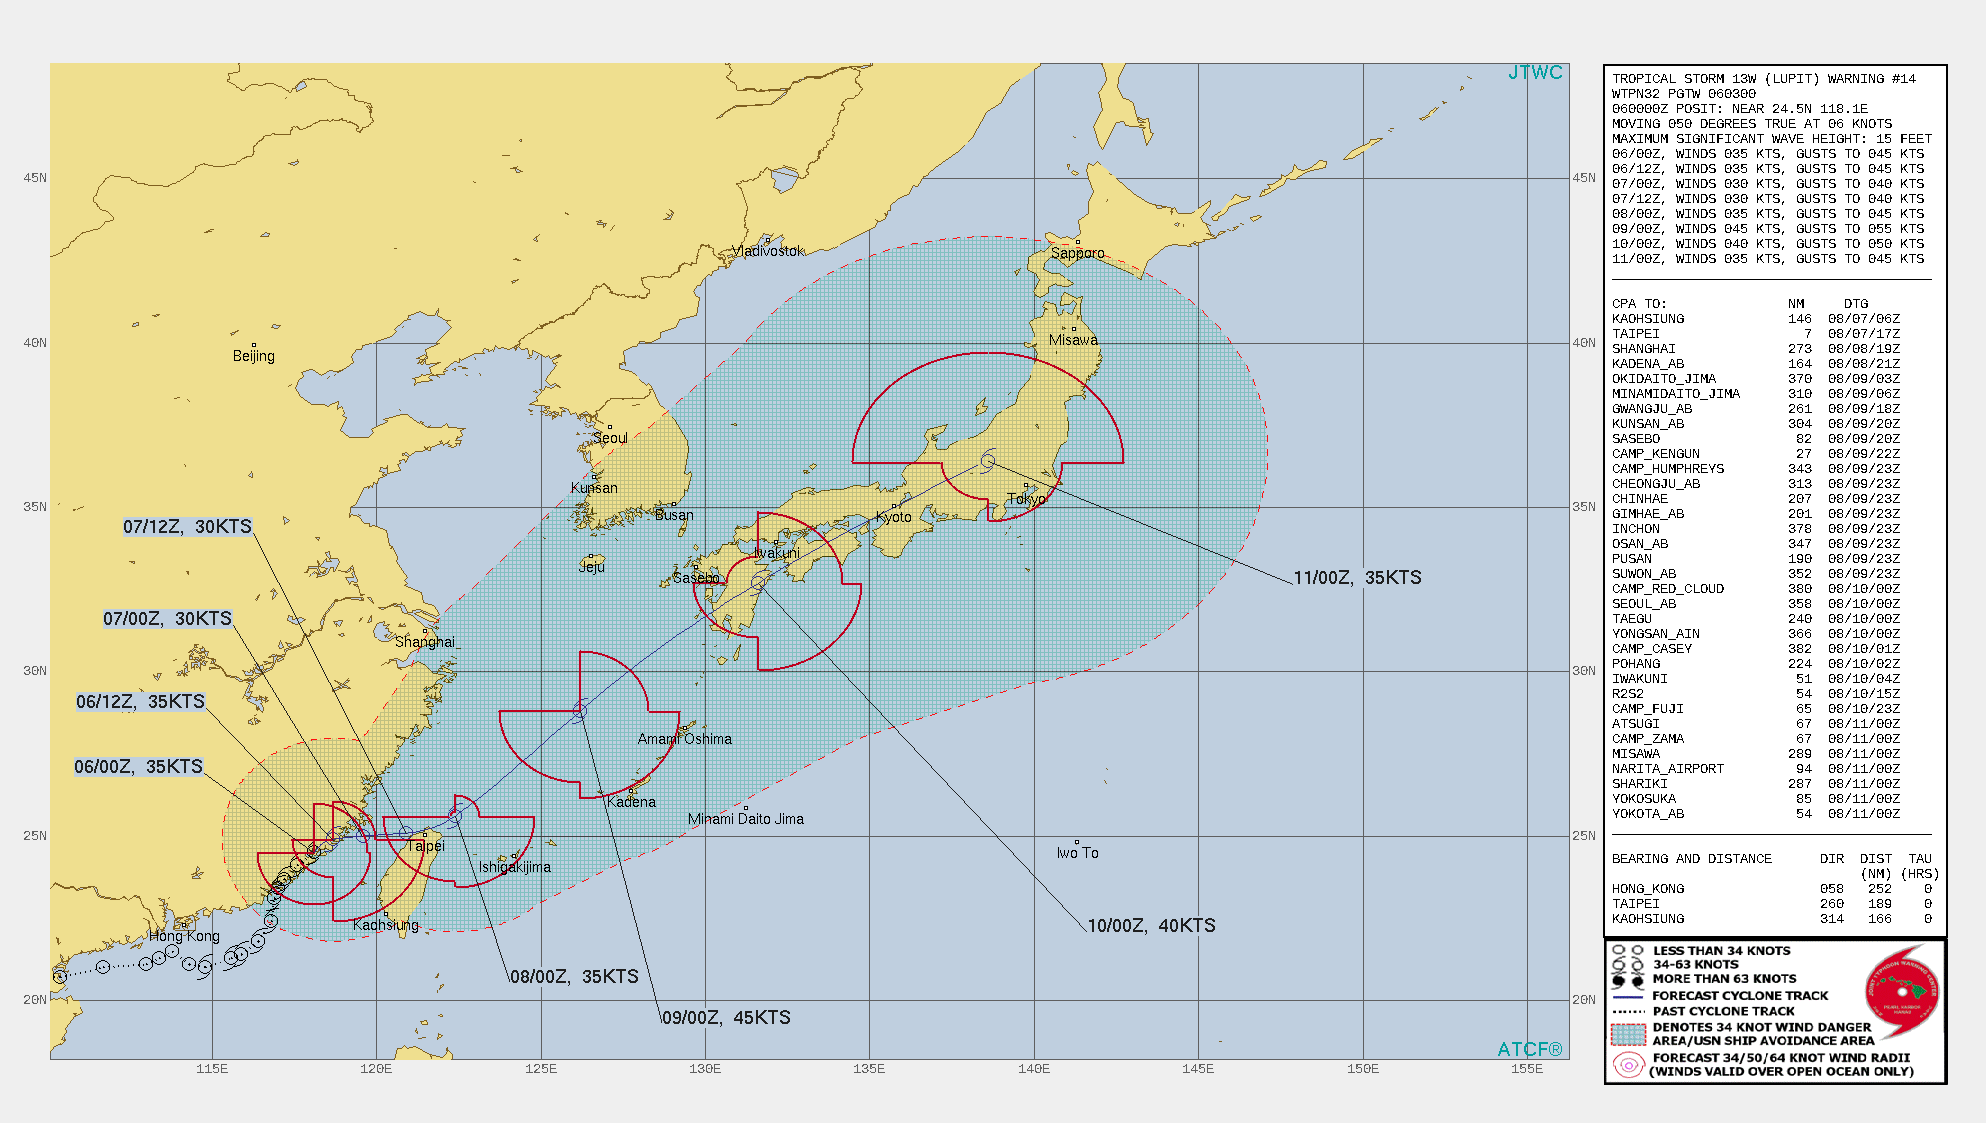 TS 13W(LUPIT). WARNING 14 ISSUED AT 06/03UTC.THERE ARE NO SIGNIFICANT CHANGES TO THE FORECAST FROM THE PREVIOUS WARNING.  FORECAST DISCUSSION: TS 13W IS FORECAST TO REMAIN OVERLAND THROUGH 12H WITH A SLOW, QUASI-STATIONARY TRACK MOTION. AFTER 12H, TS 14W SHOULD TRACK EASTWARD BACK OVER WATER THROUGH 36H THEN  TURN NORTHEASTWARD WITHIN THE SOUTHWESTERLY FLOW ALONG THE  NORTHWESTERN PERIPHERY OF A BUILDING SUBTROPICAL RIDGE POSITIONED  SOUTH OF JAPAN. AFTER 36H, TS 13W SHOULD GRADUALLY INTENSIFY  THROUGH THE FORECAST PERIOD TO A PEAK OF 45 KNOTS AT 72H. THE  SYSTEM SHOULD MAKE LANDFALL OVER KYUSHU NEAR 96H AND IS EXPECTED TO  START INTERACTING WITH A DEEP UPPER-LEVEL TROUGH POSITIONED WEST OF  KYUSHU BY 96H AND WILL COMPLETE EXTRA-TROPICAL TRANSITION AS IT  TRACKS UNDER THE JET OVER CENTRAL JAPAN BY 120H.